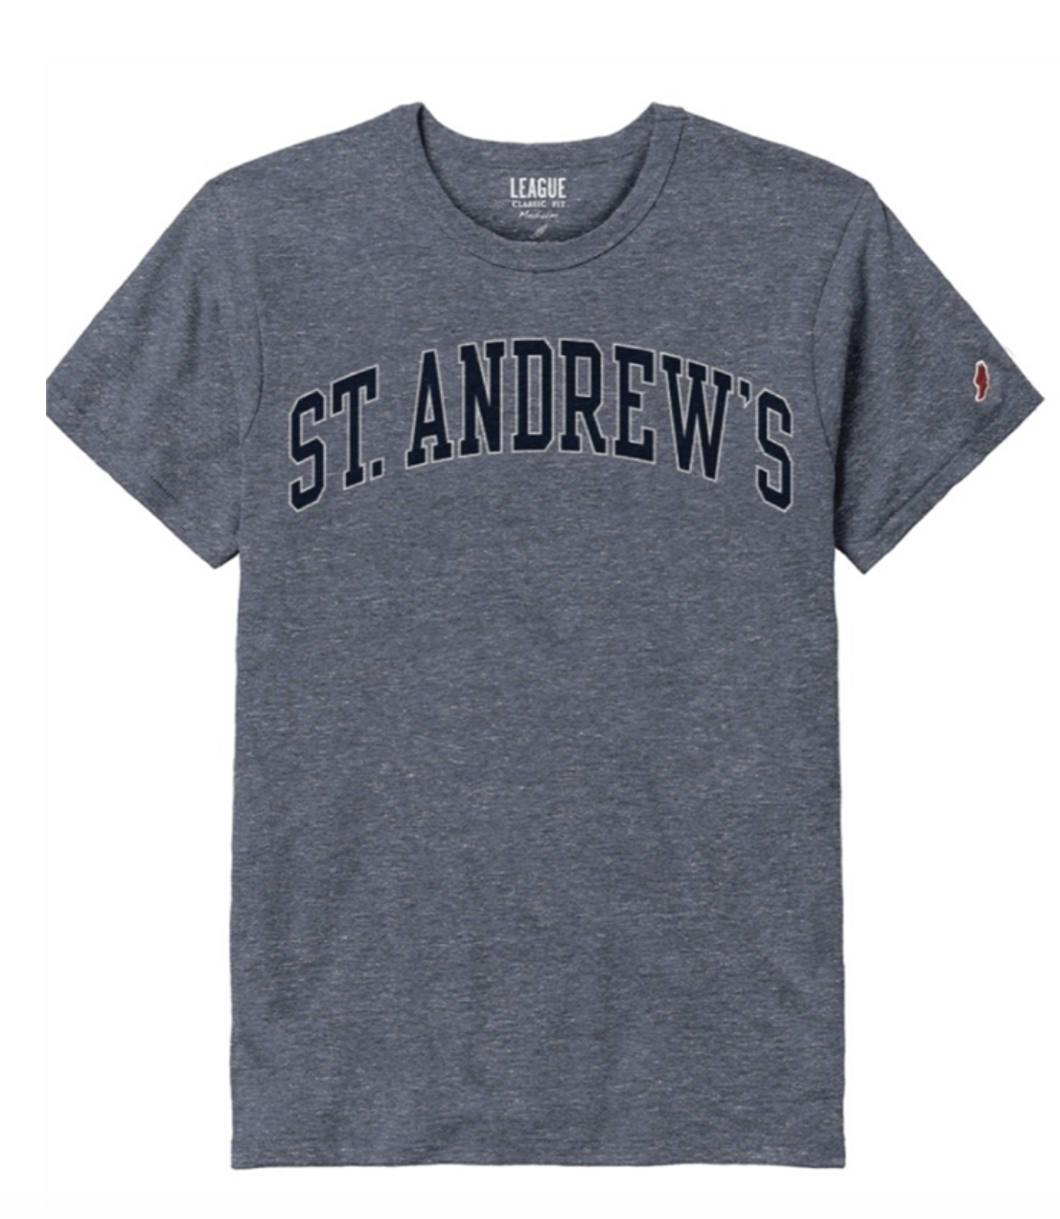 SALE: St. Andrew's Shirt